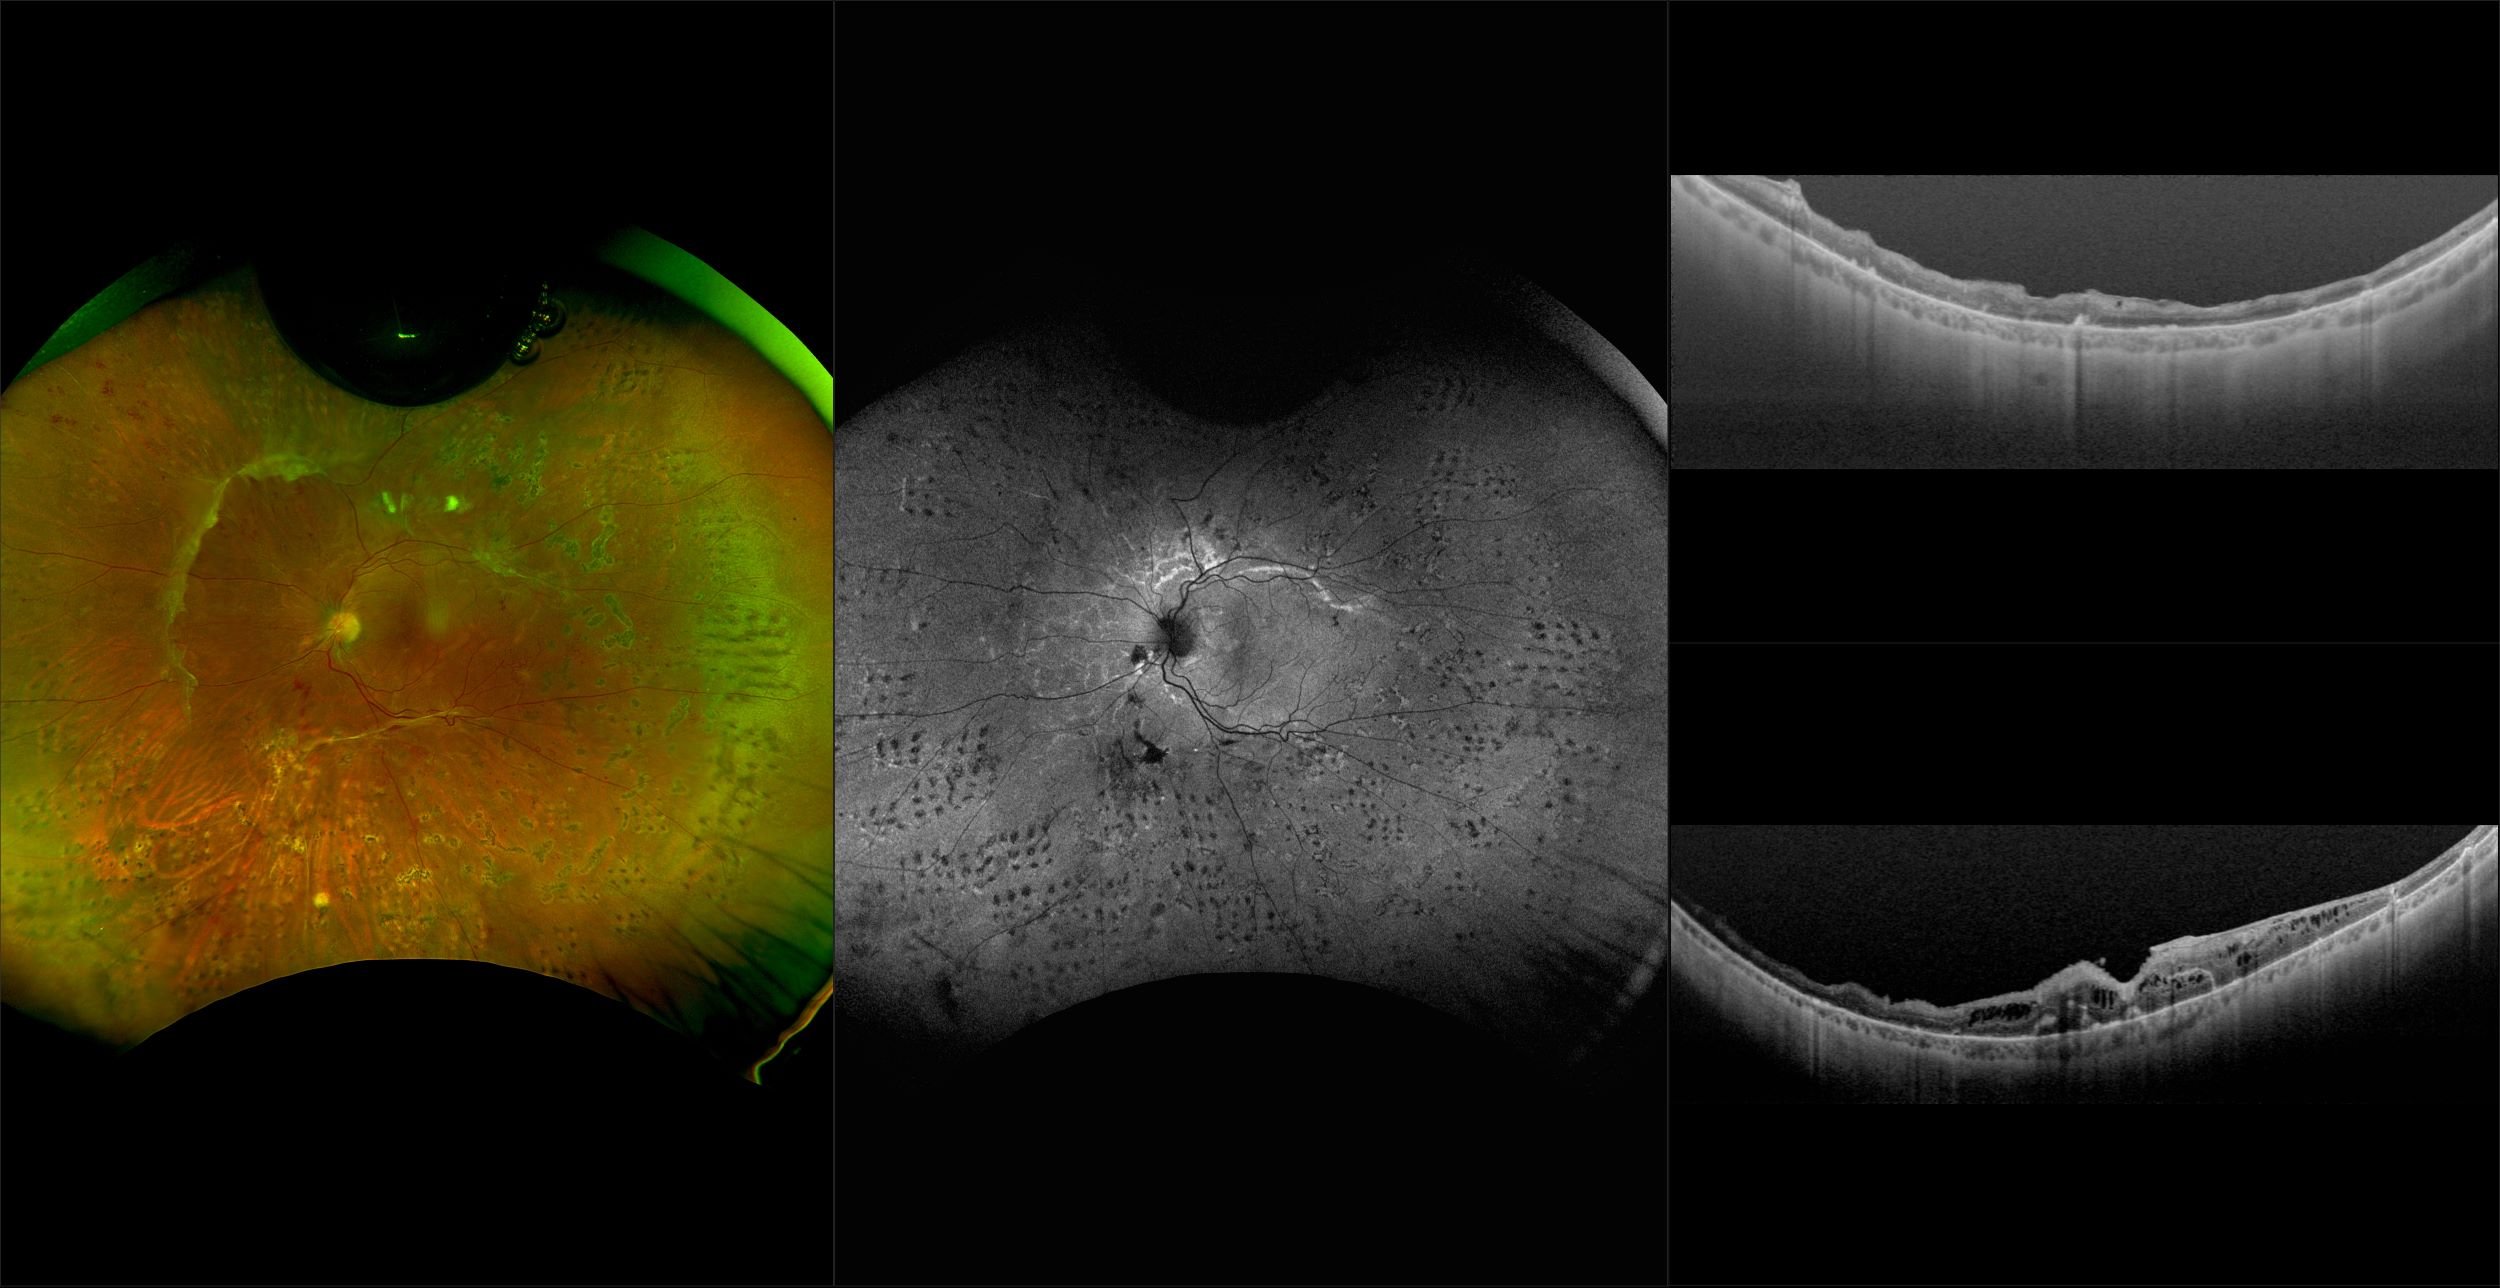 Silverstone - Tractional Retinal Detachment with Silicone Oil, RG, AF, OCT